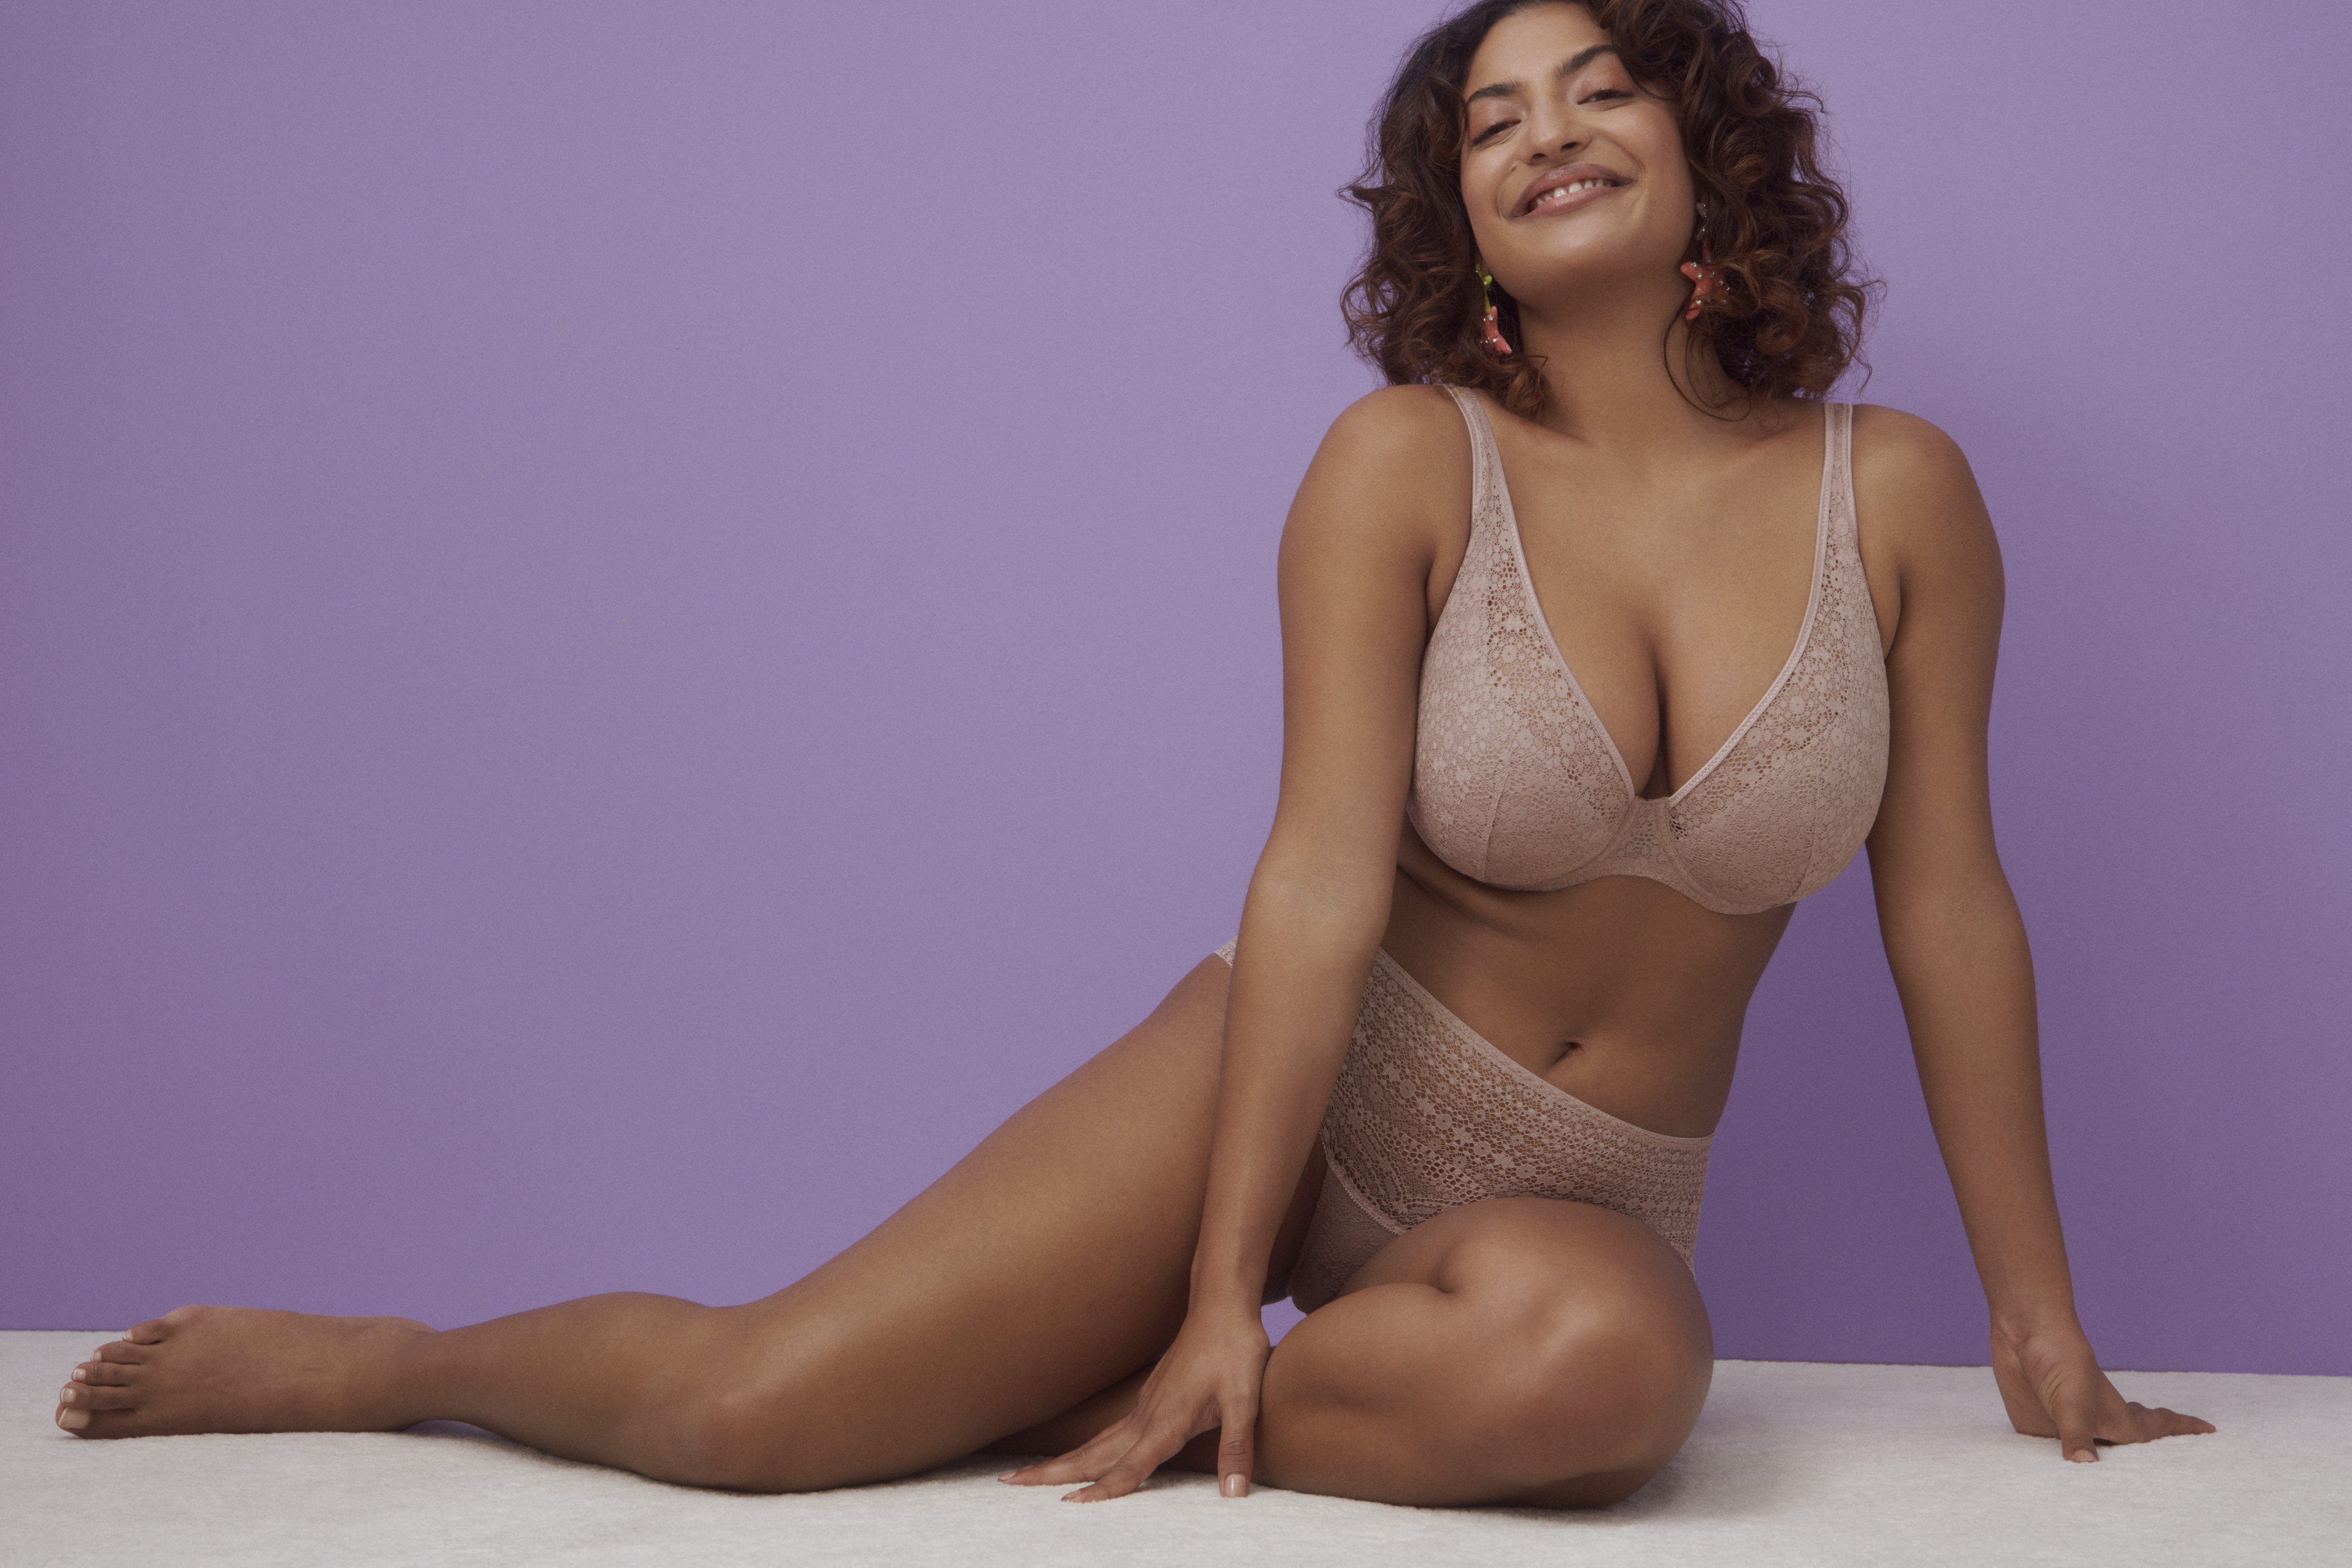 How To Wear Lingerie Without Looking Like You're Trying Too Hard - Betches